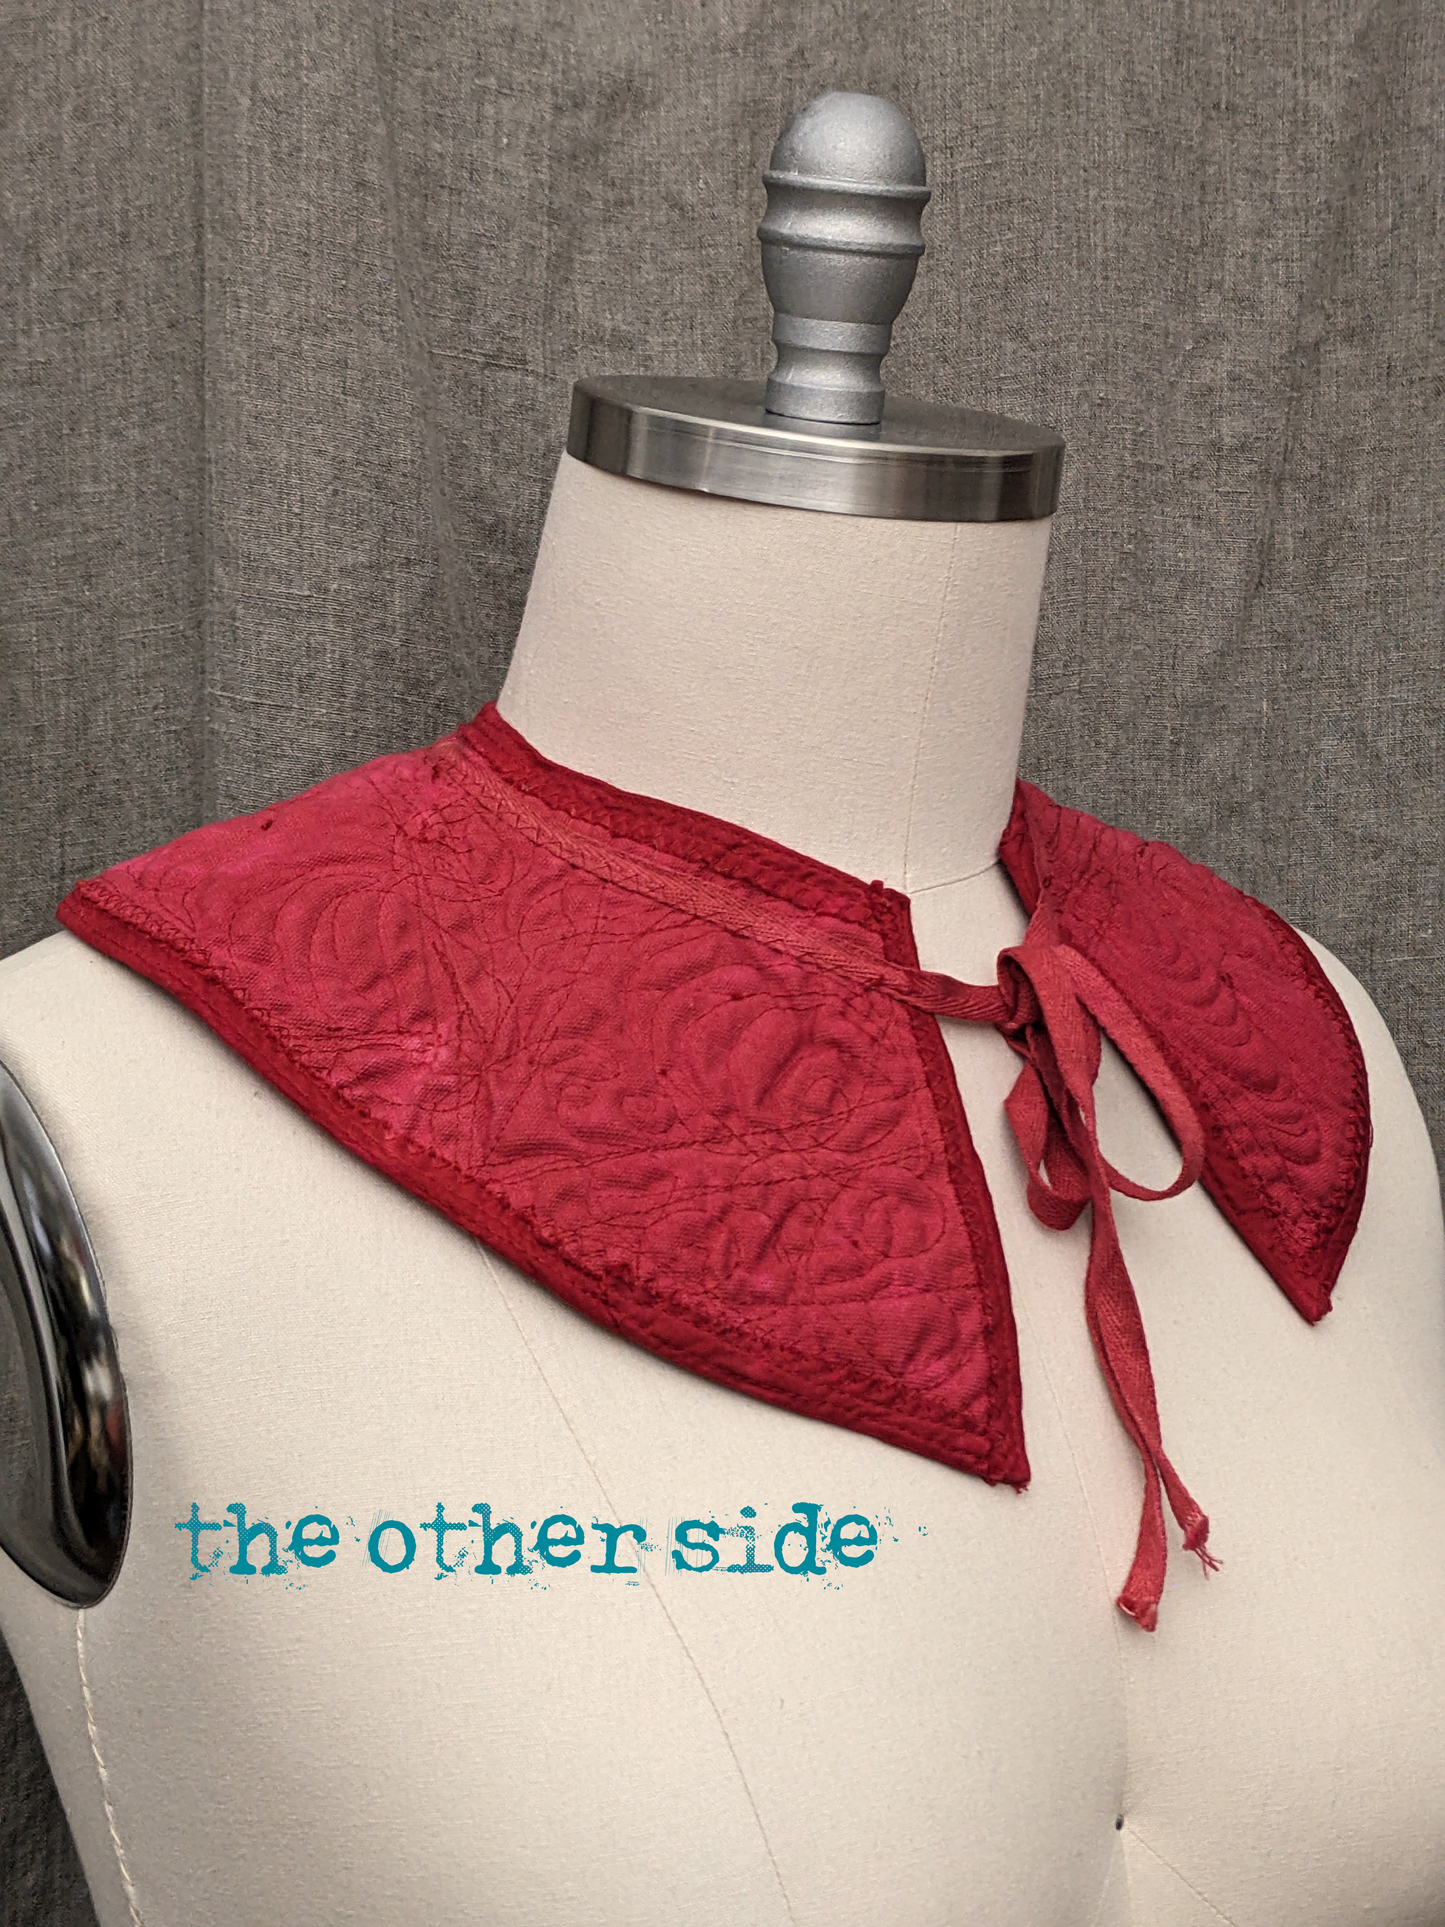 secret lentil artifacted collar (detachable / attachable) in bold red